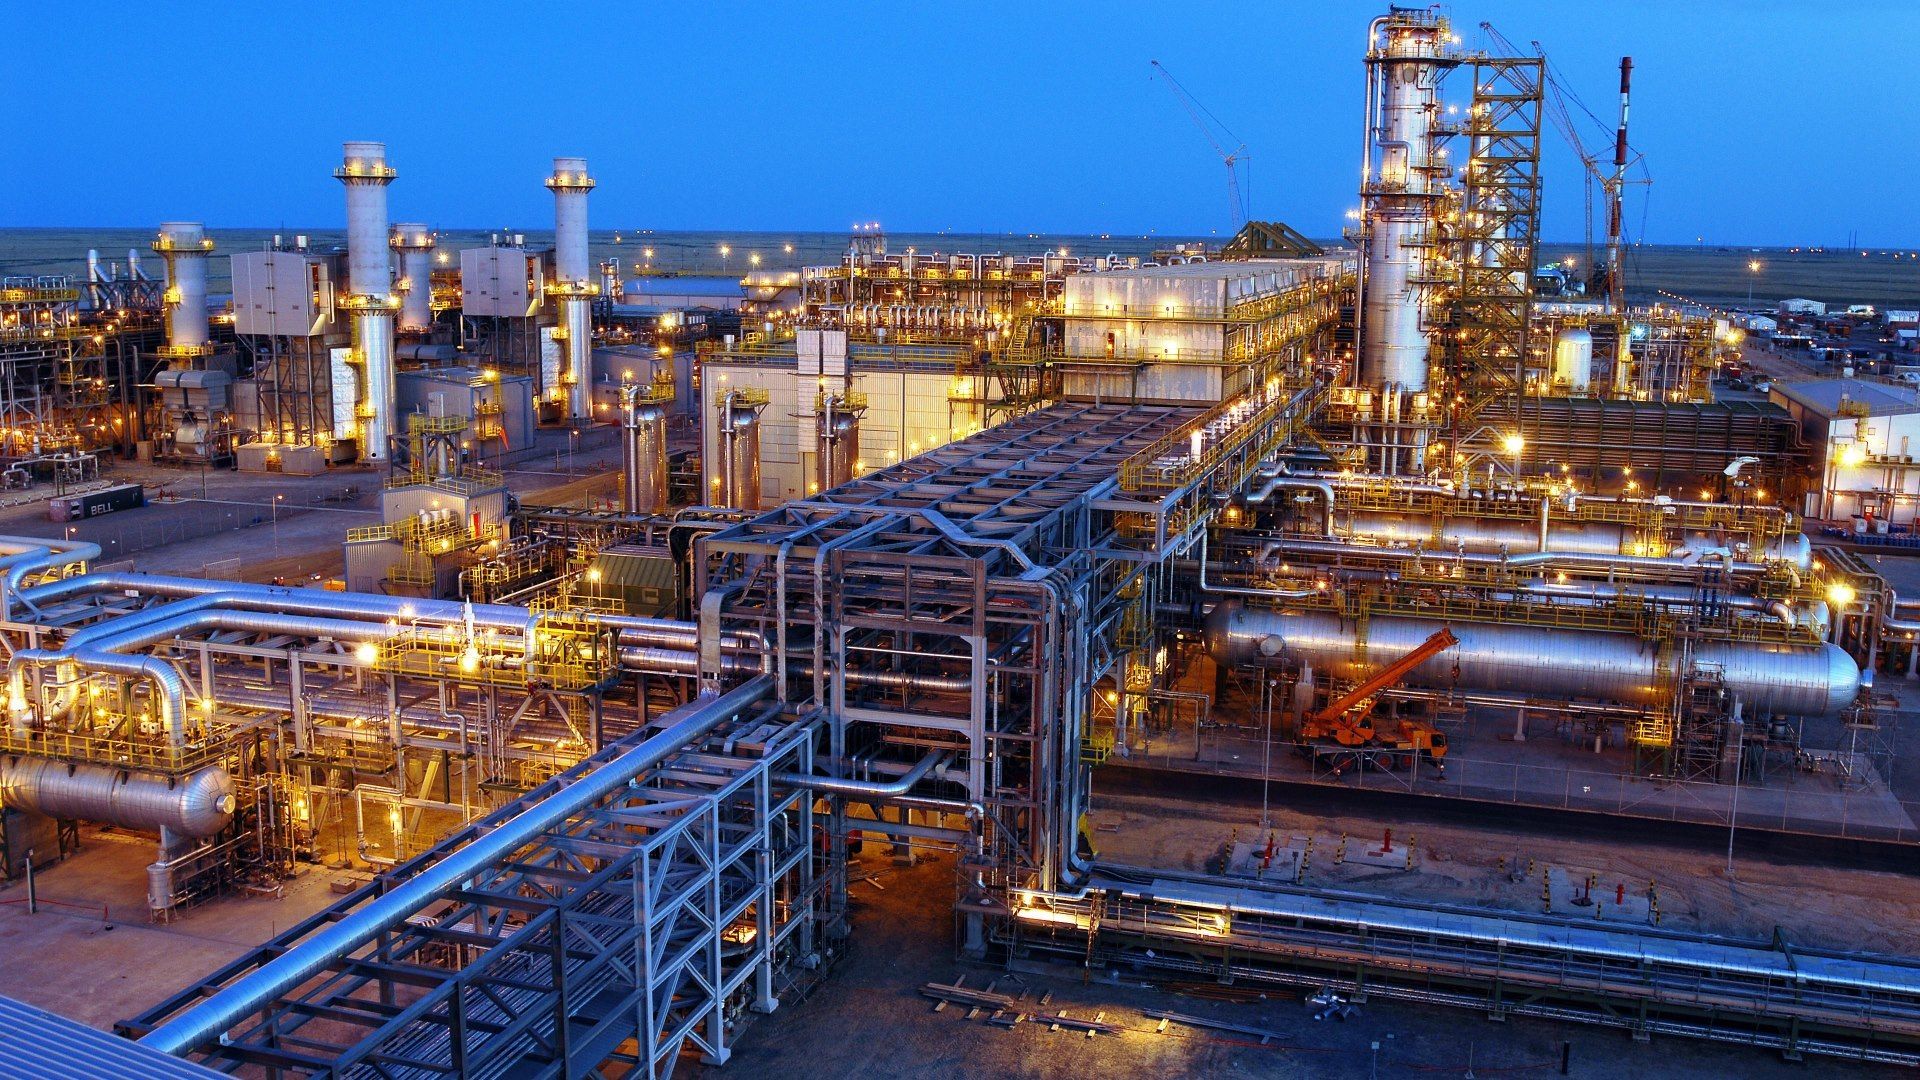 Automation, Furnace Automation, Pipe Cutting Automation, And Gas Plant